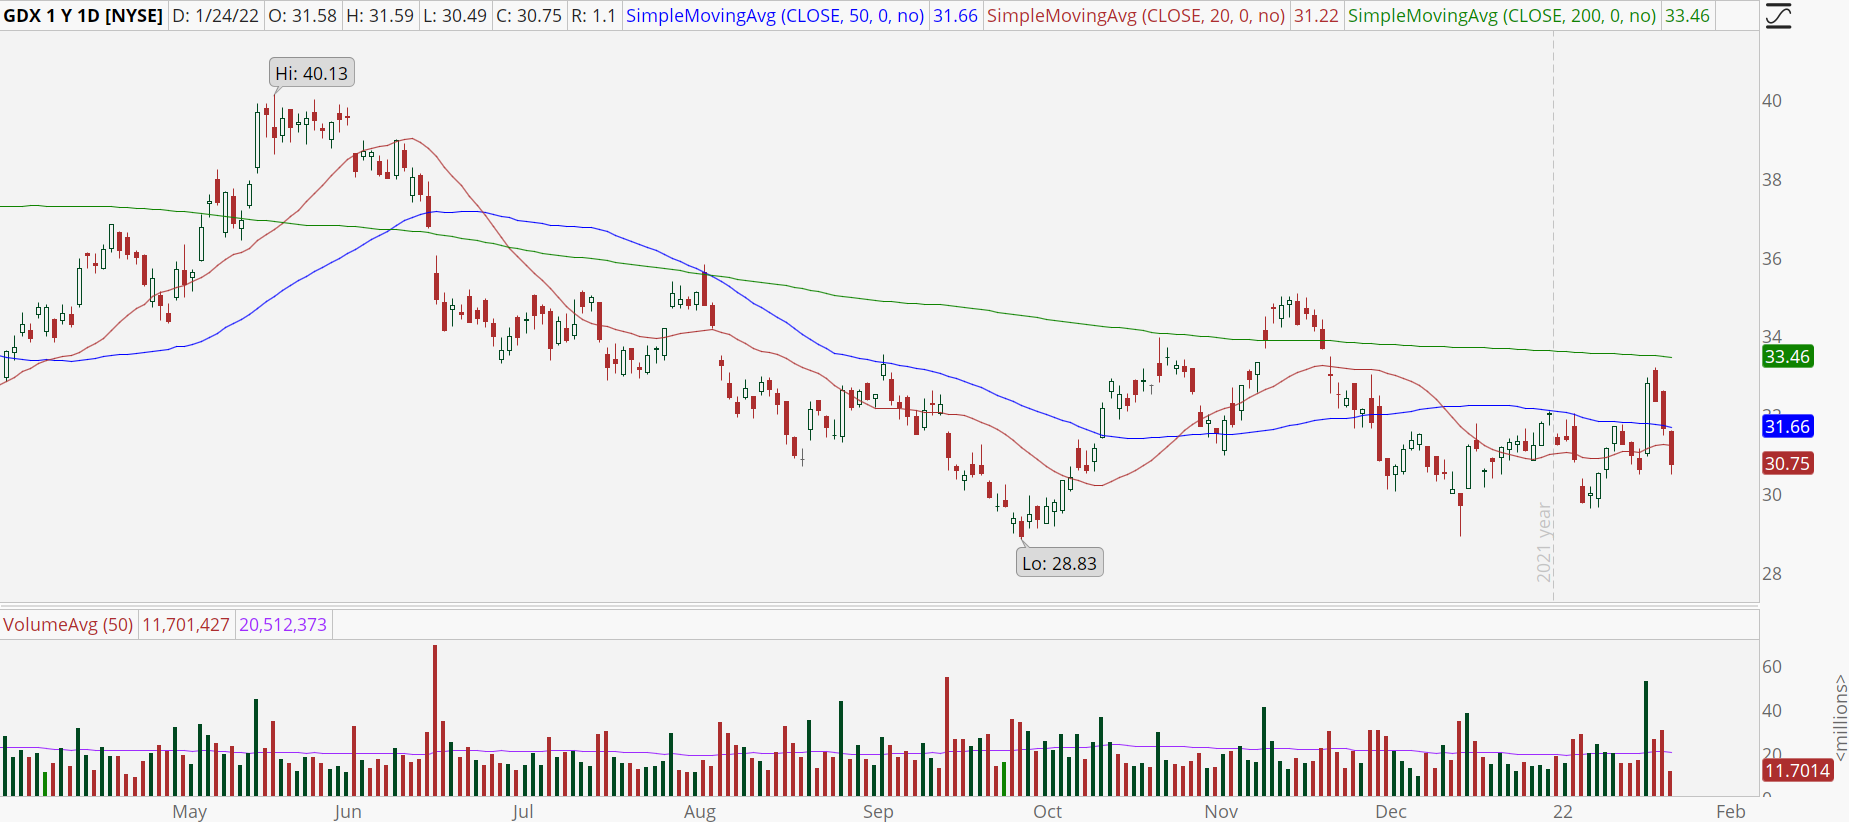 Gold Miners ETF (GDX) with potential bottoming formation.